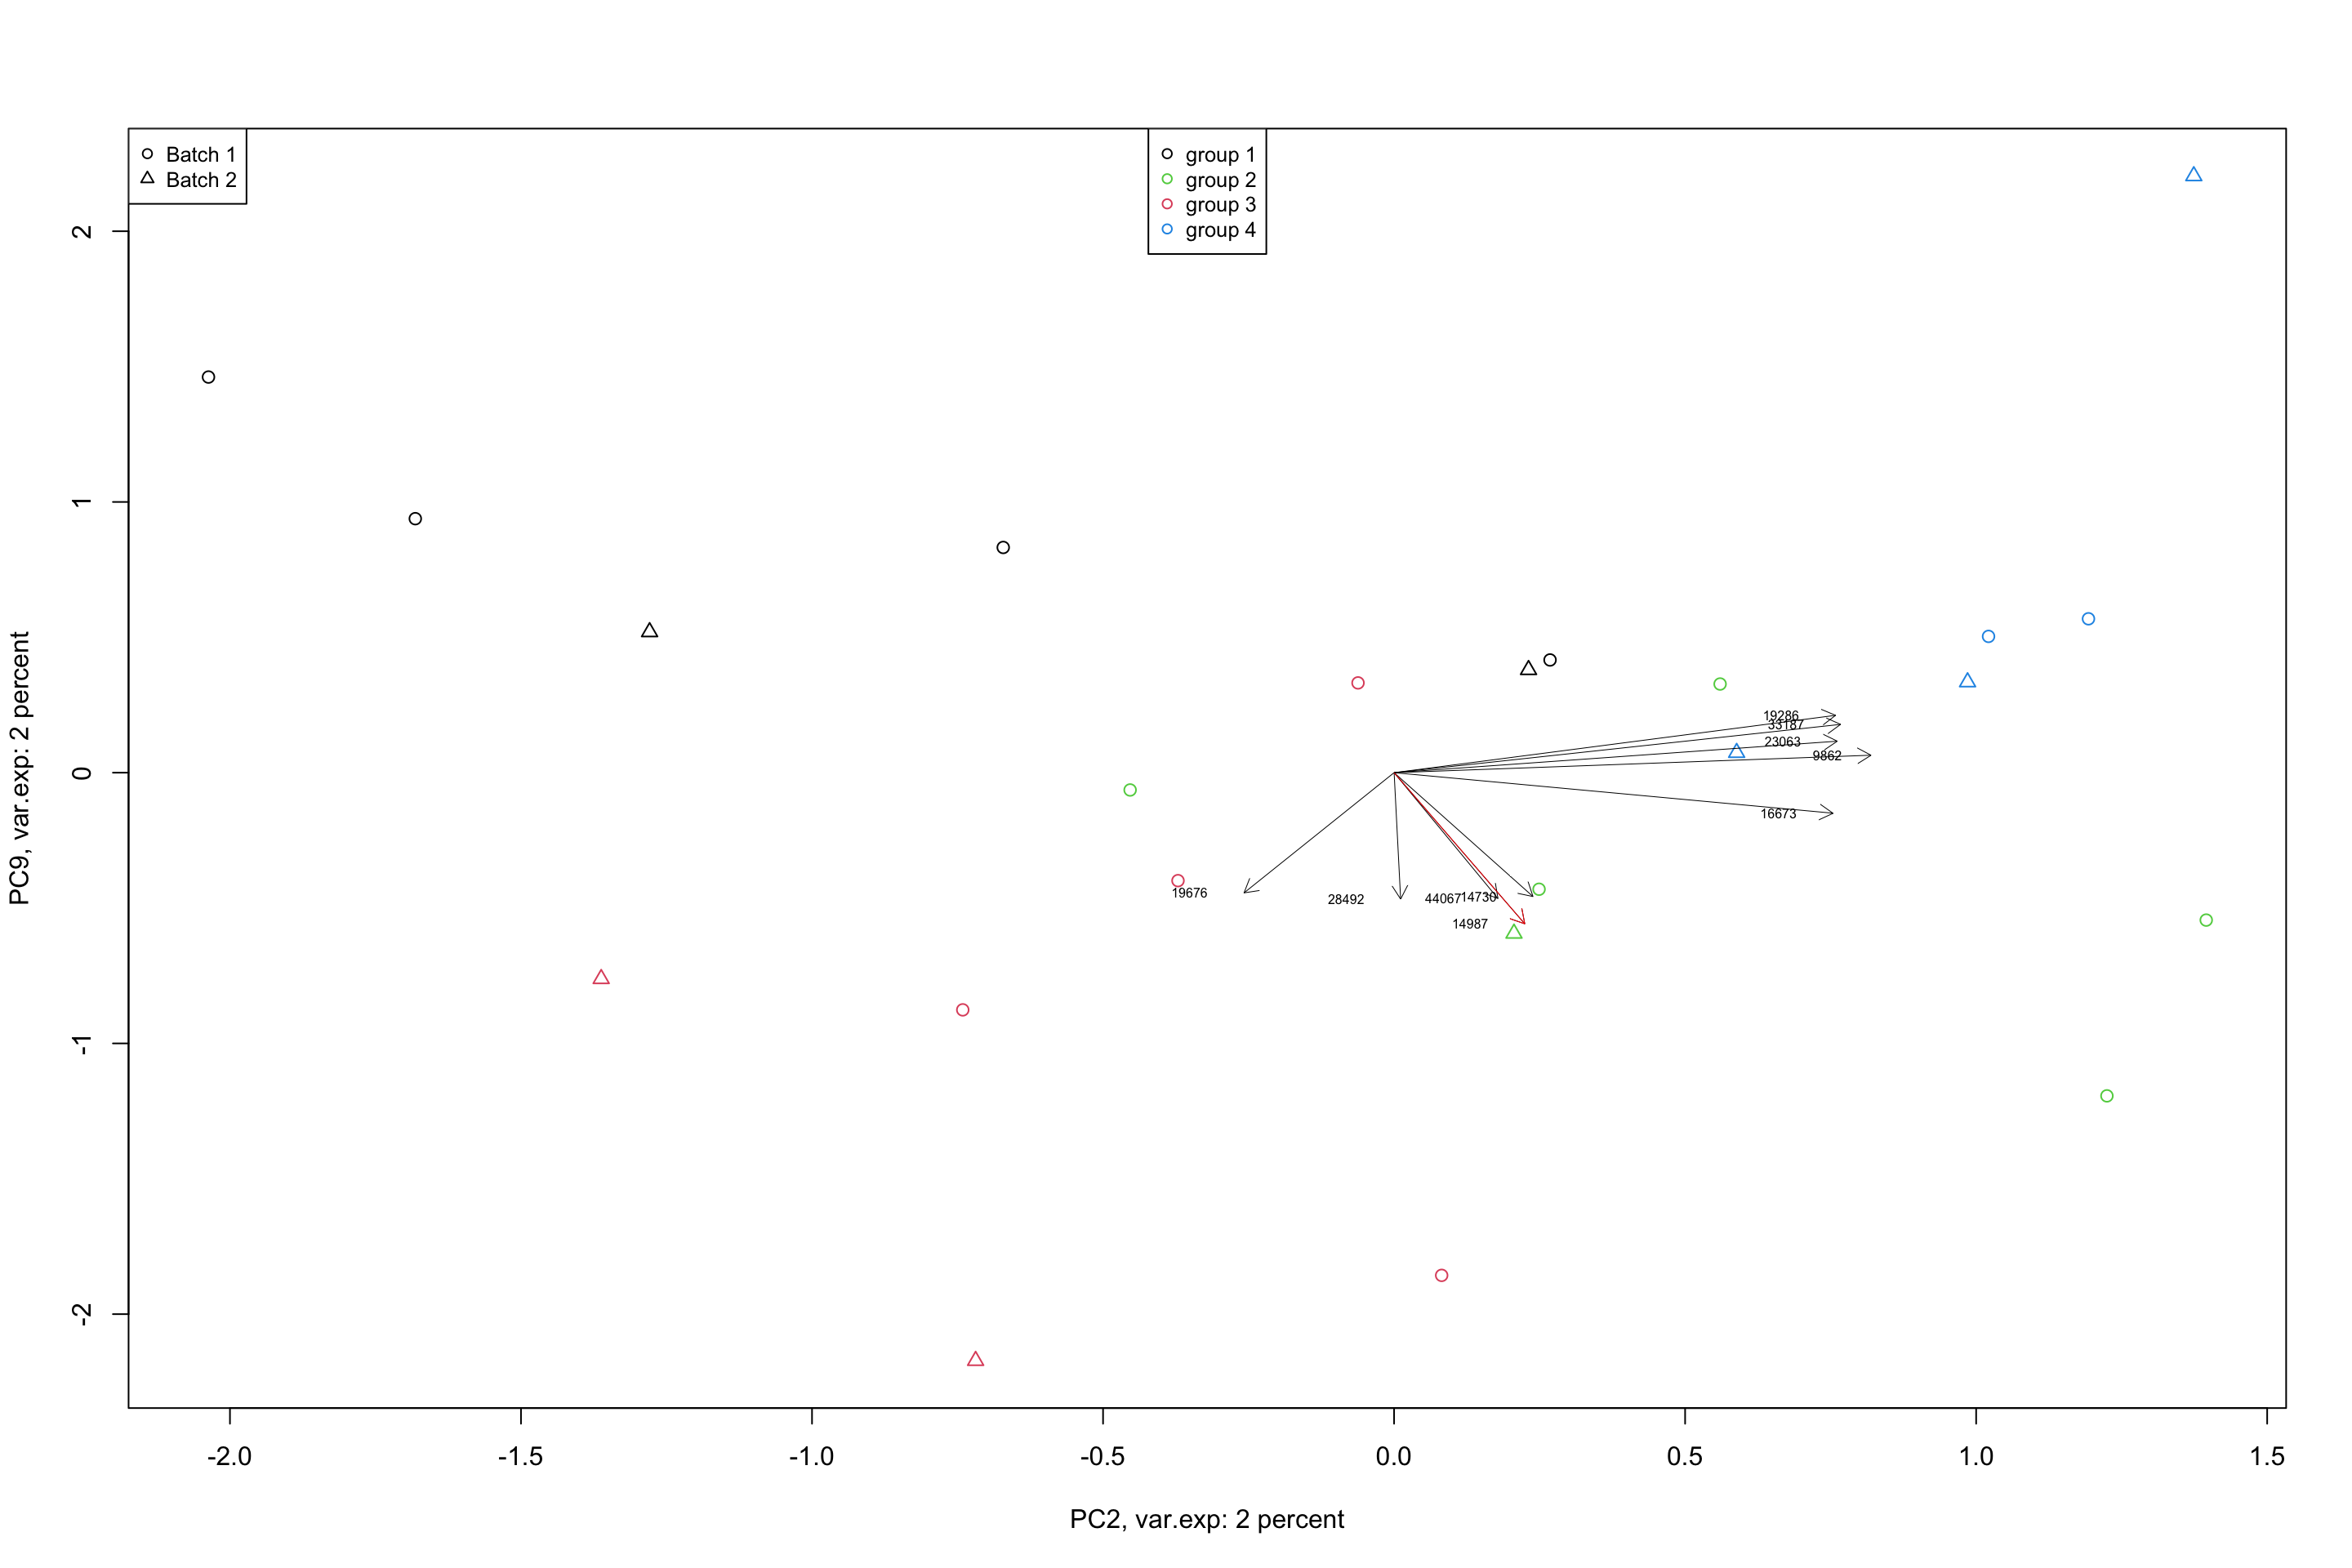 Top 5 variables per component are plotted using biplot